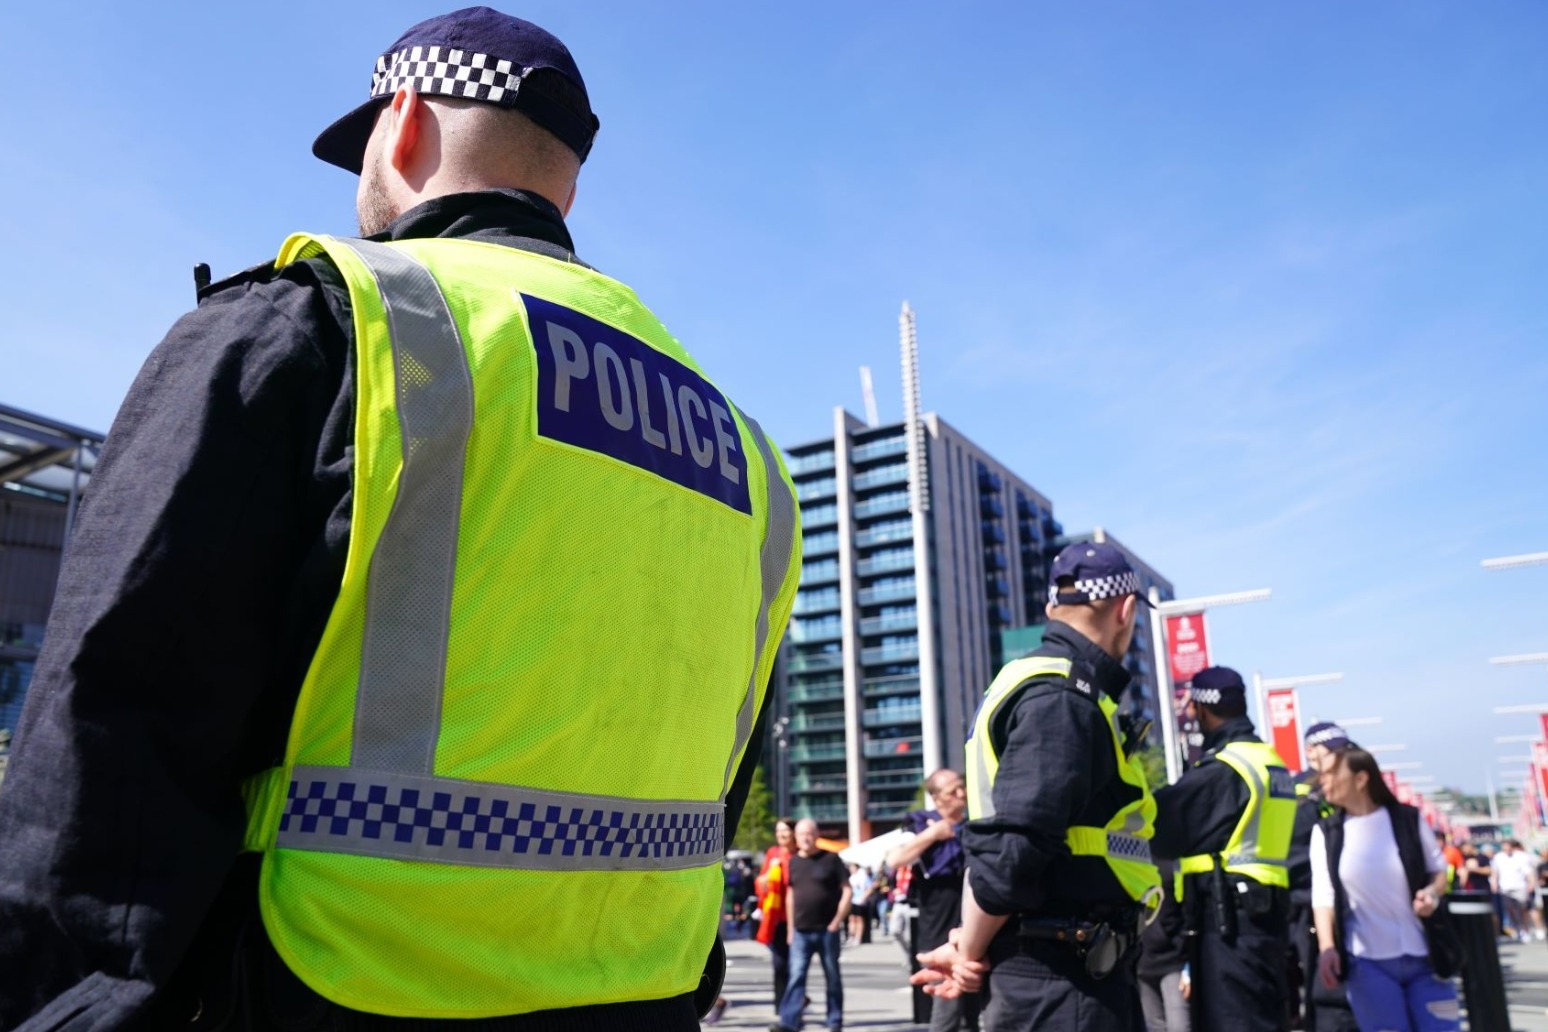 Watchdogs find ‘weaknesses in way police investigate colleagues’ in abuse cases. 